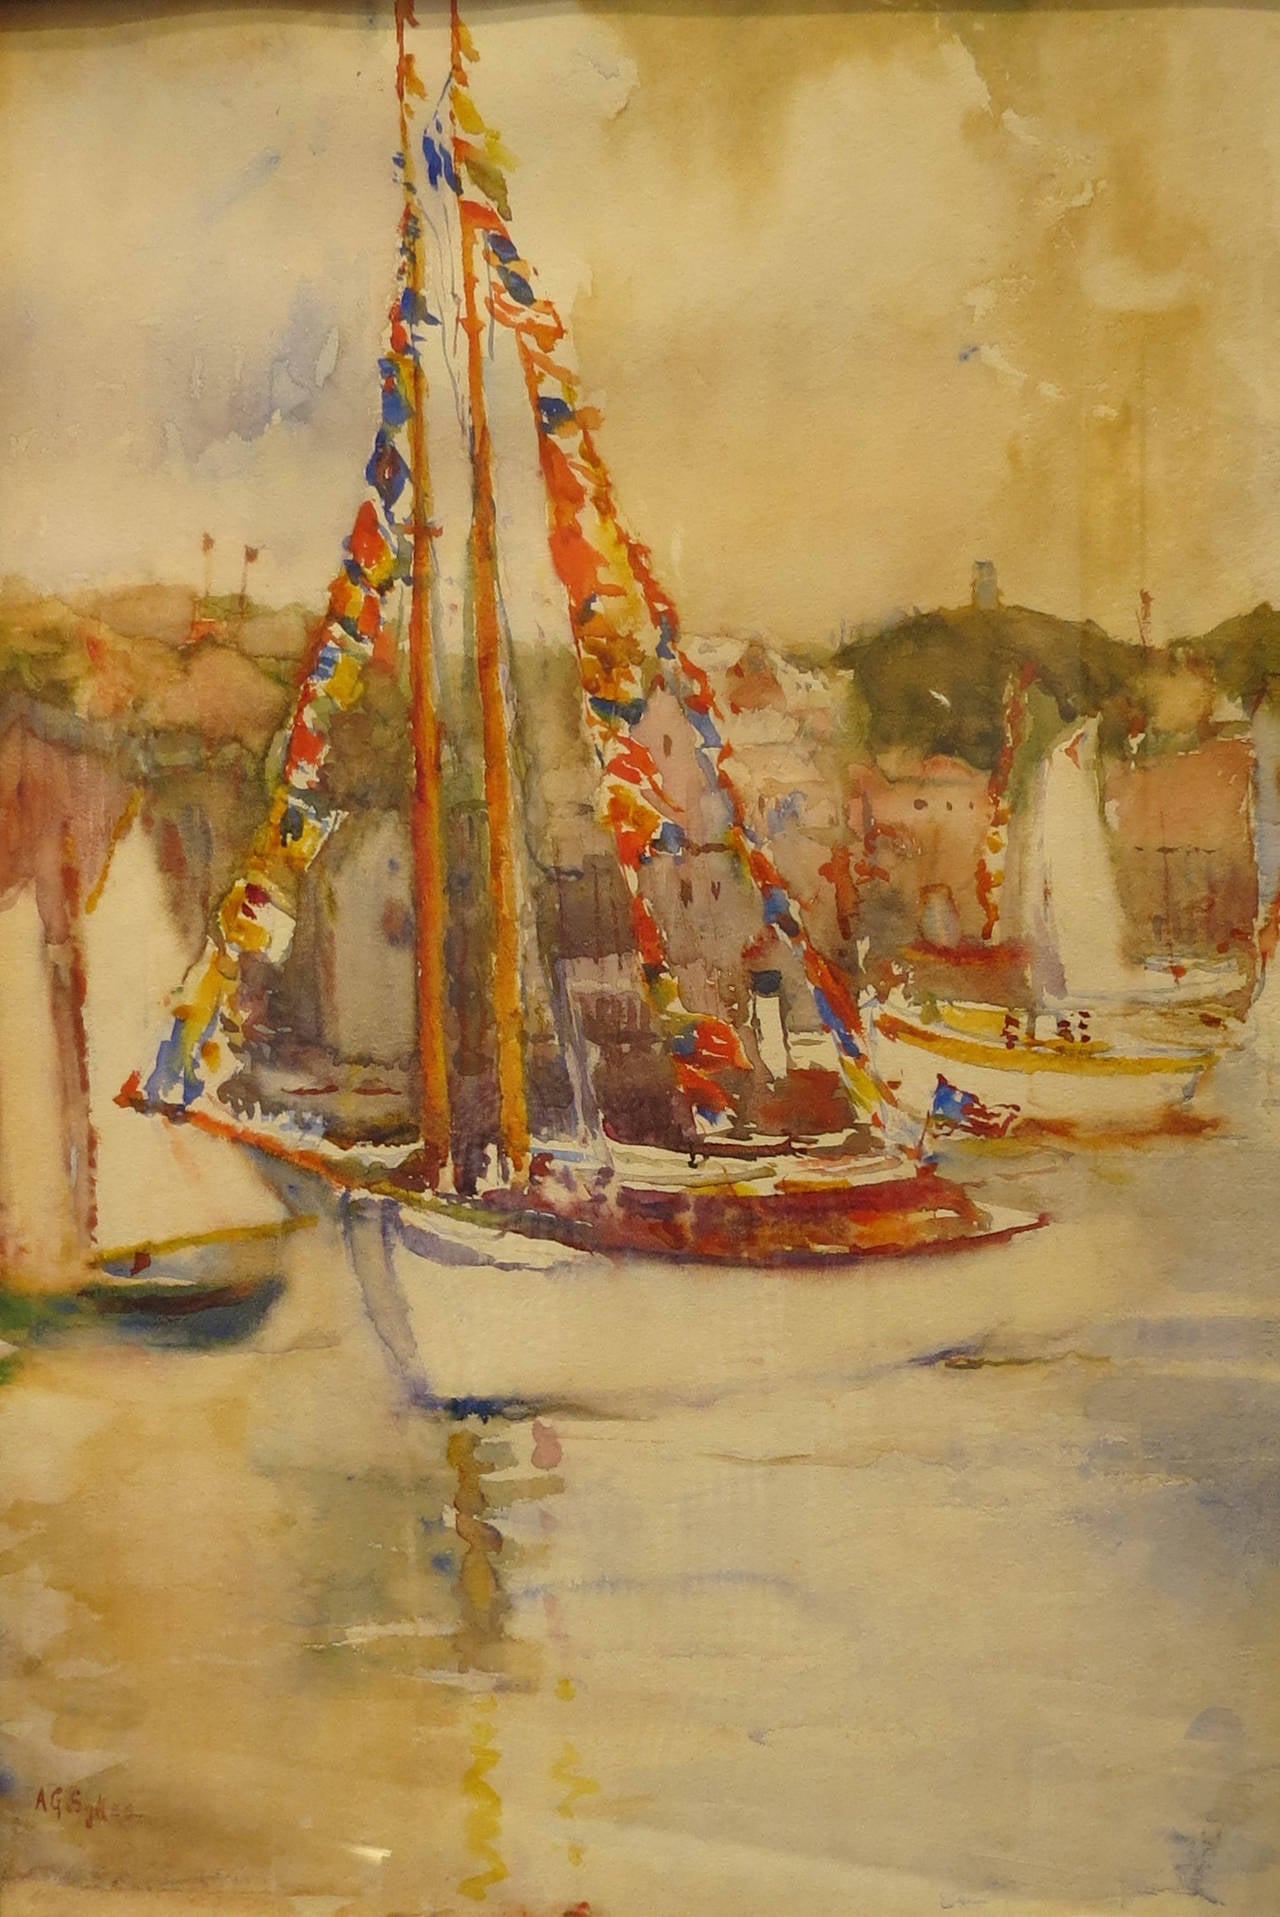 Annie Gooding Sykes Landscape Art - "Sailboat With Semaphore Flags"